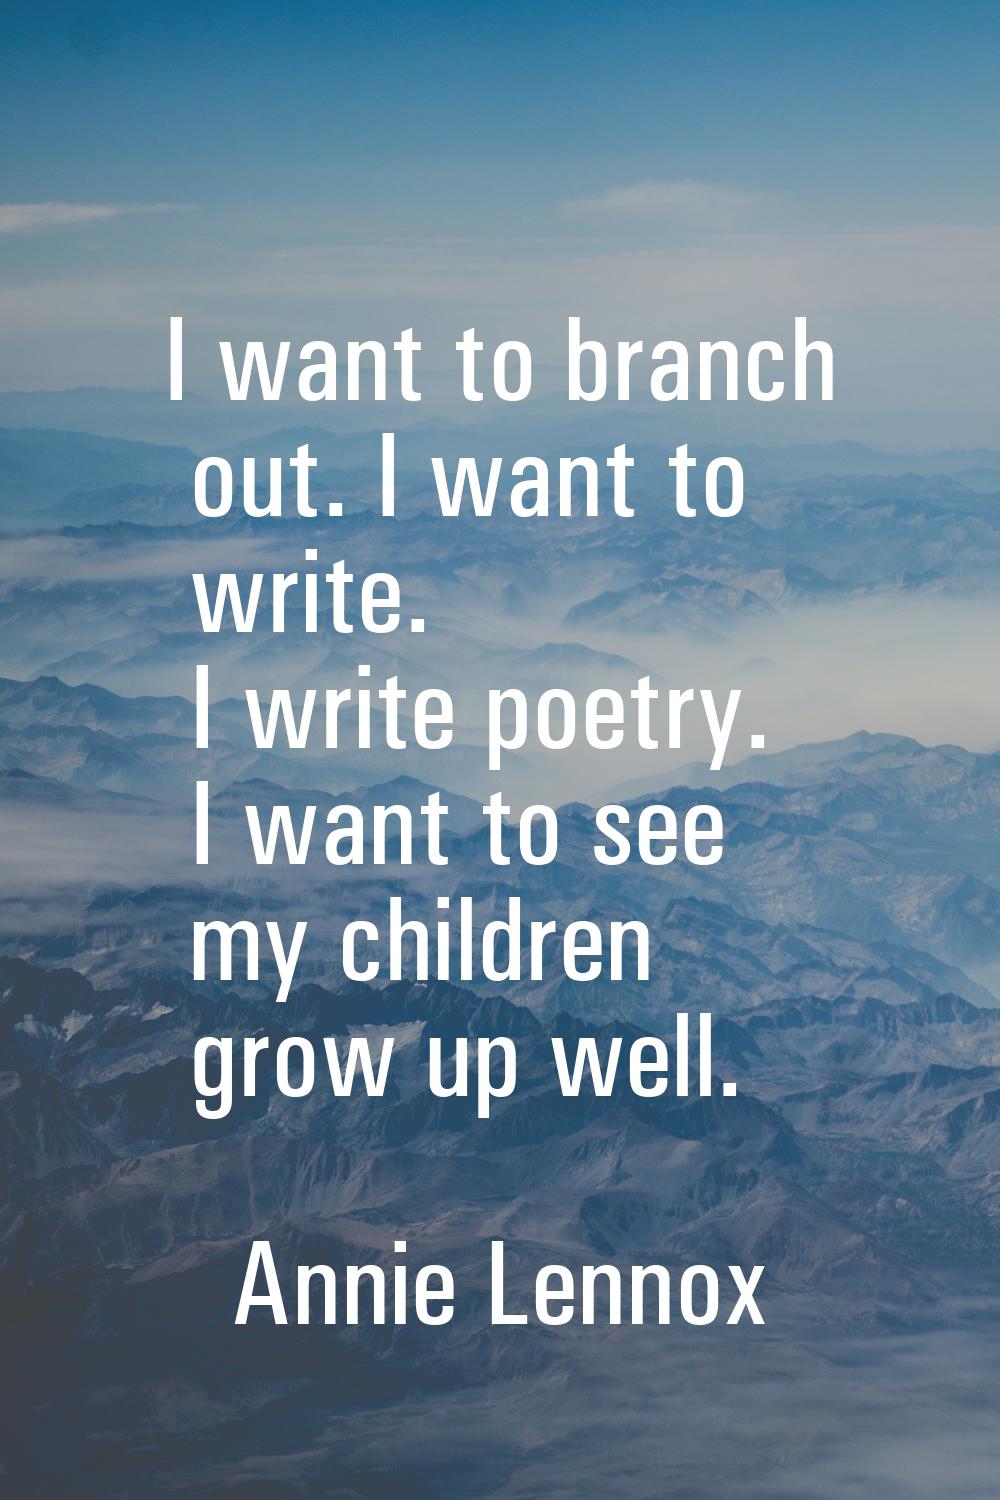 I want to branch out. I want to write. I write poetry. I want to see my children grow up well.